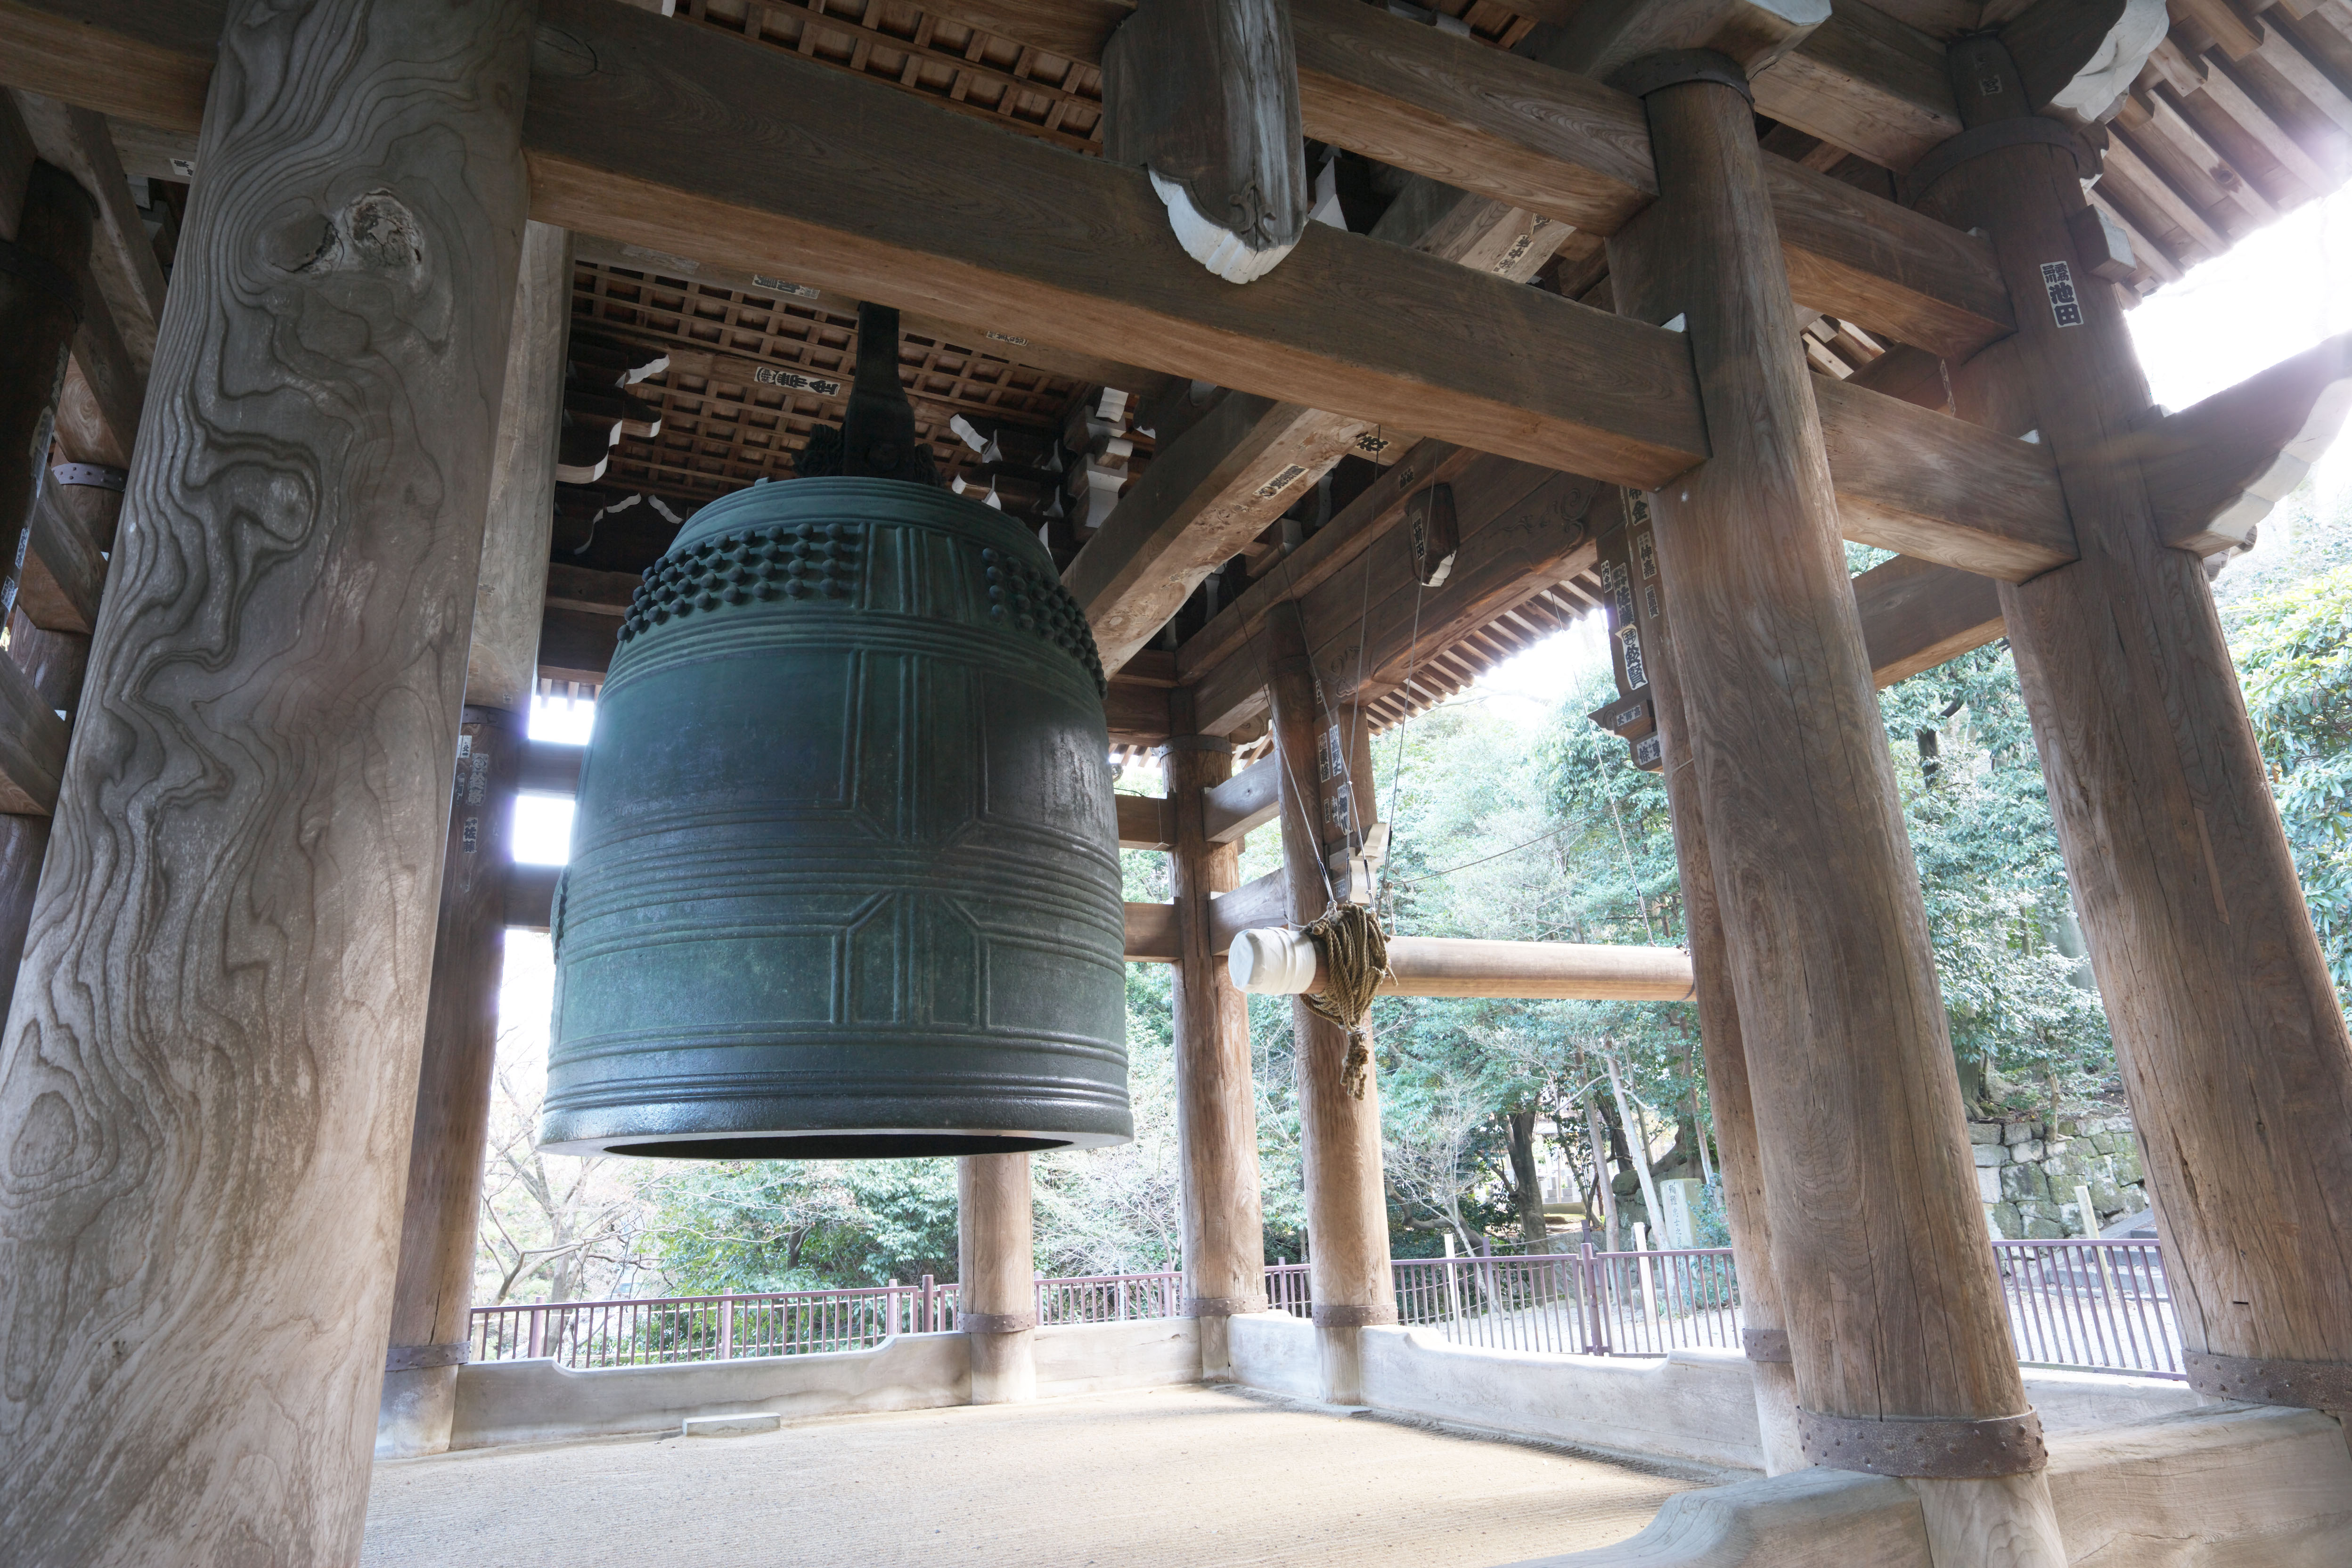 photo,material,free,landscape,picture,stock photo,Creative Commons,Chionin Institute large bell tower, Buddhism, HOUNEN, Hanging bell, Zen temple